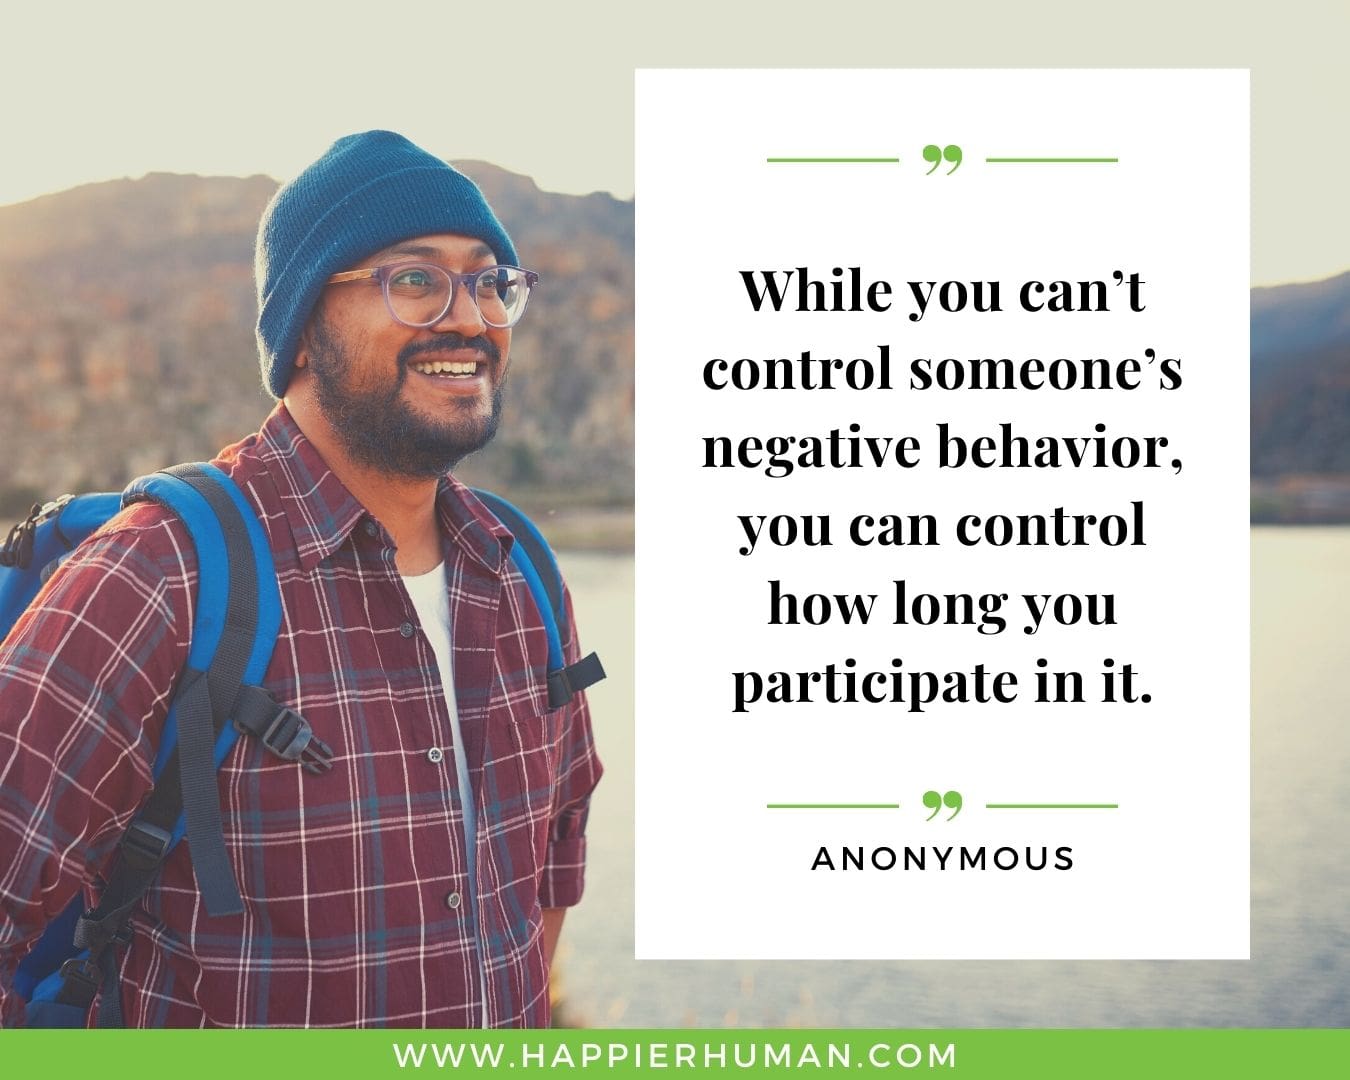 Toxic People Quotes - “While you can’t control someone’s negative behavior, you can control how long you participate in it.” – Anonymous